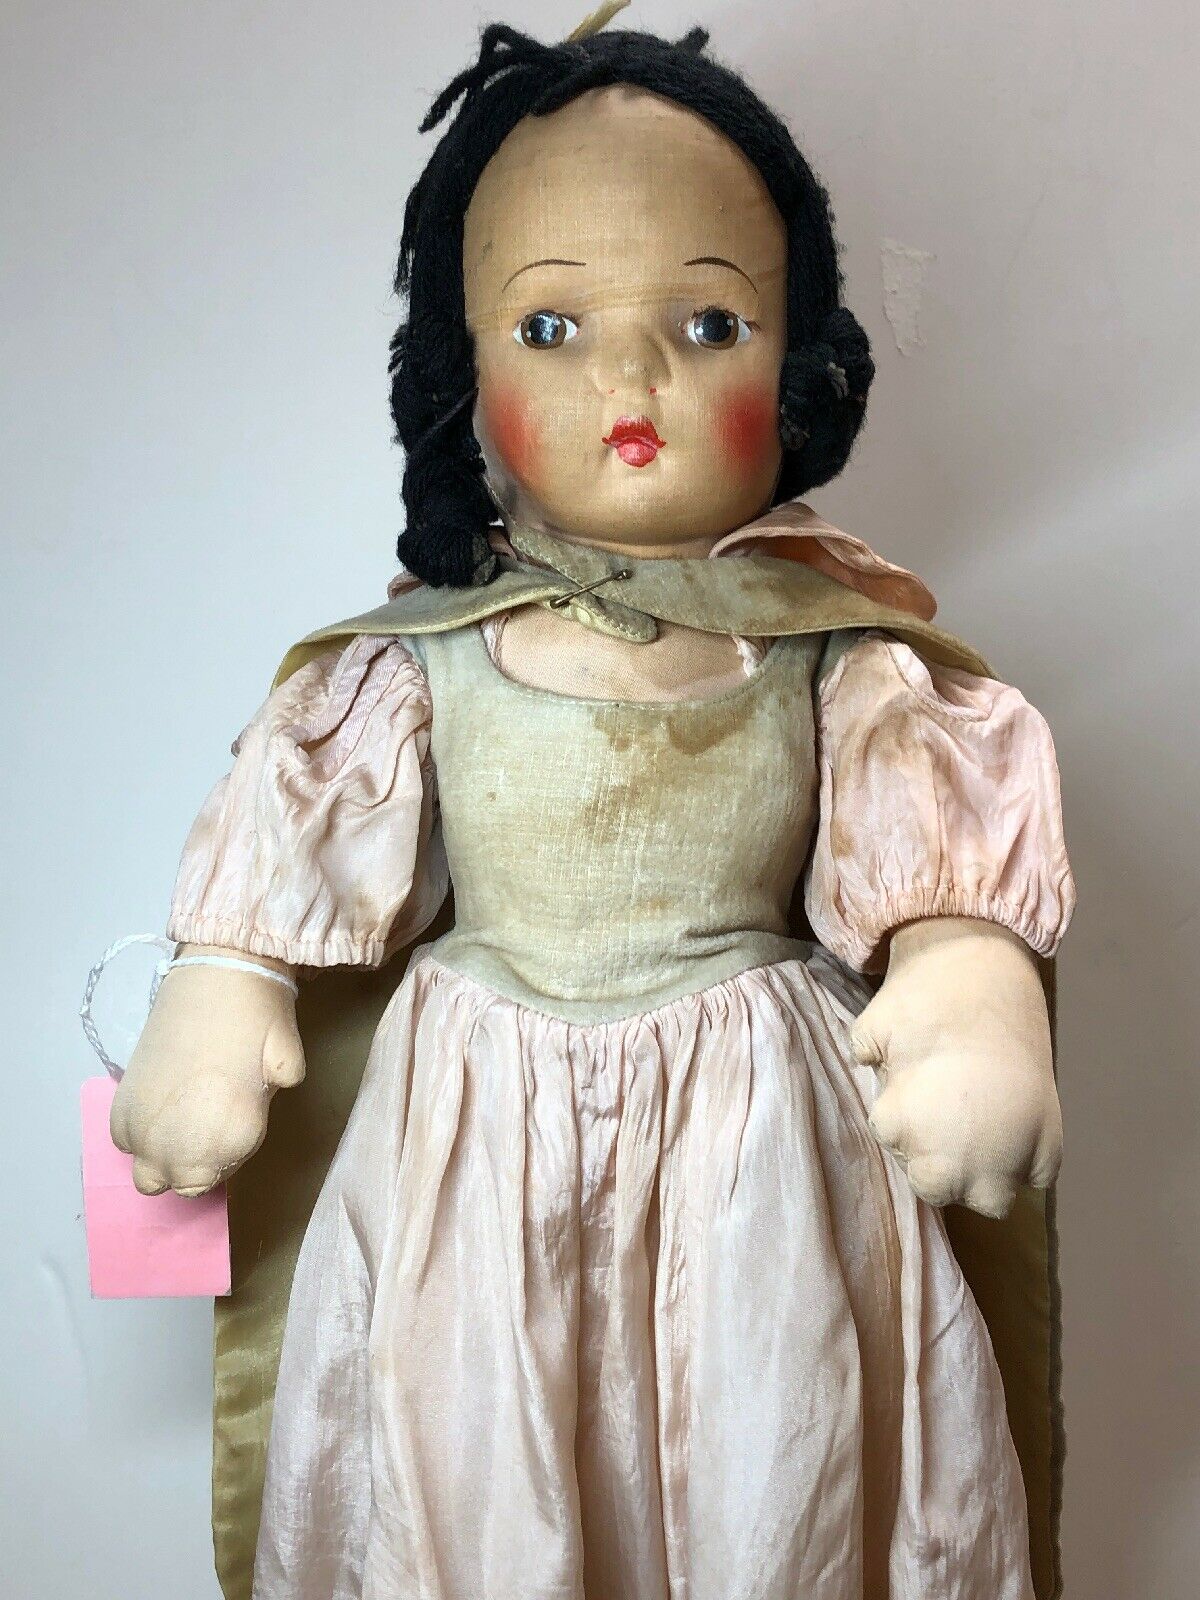 19” Vintage Antique 1940’s Kruger Snow White Cloth Doll Painted Face Sf5